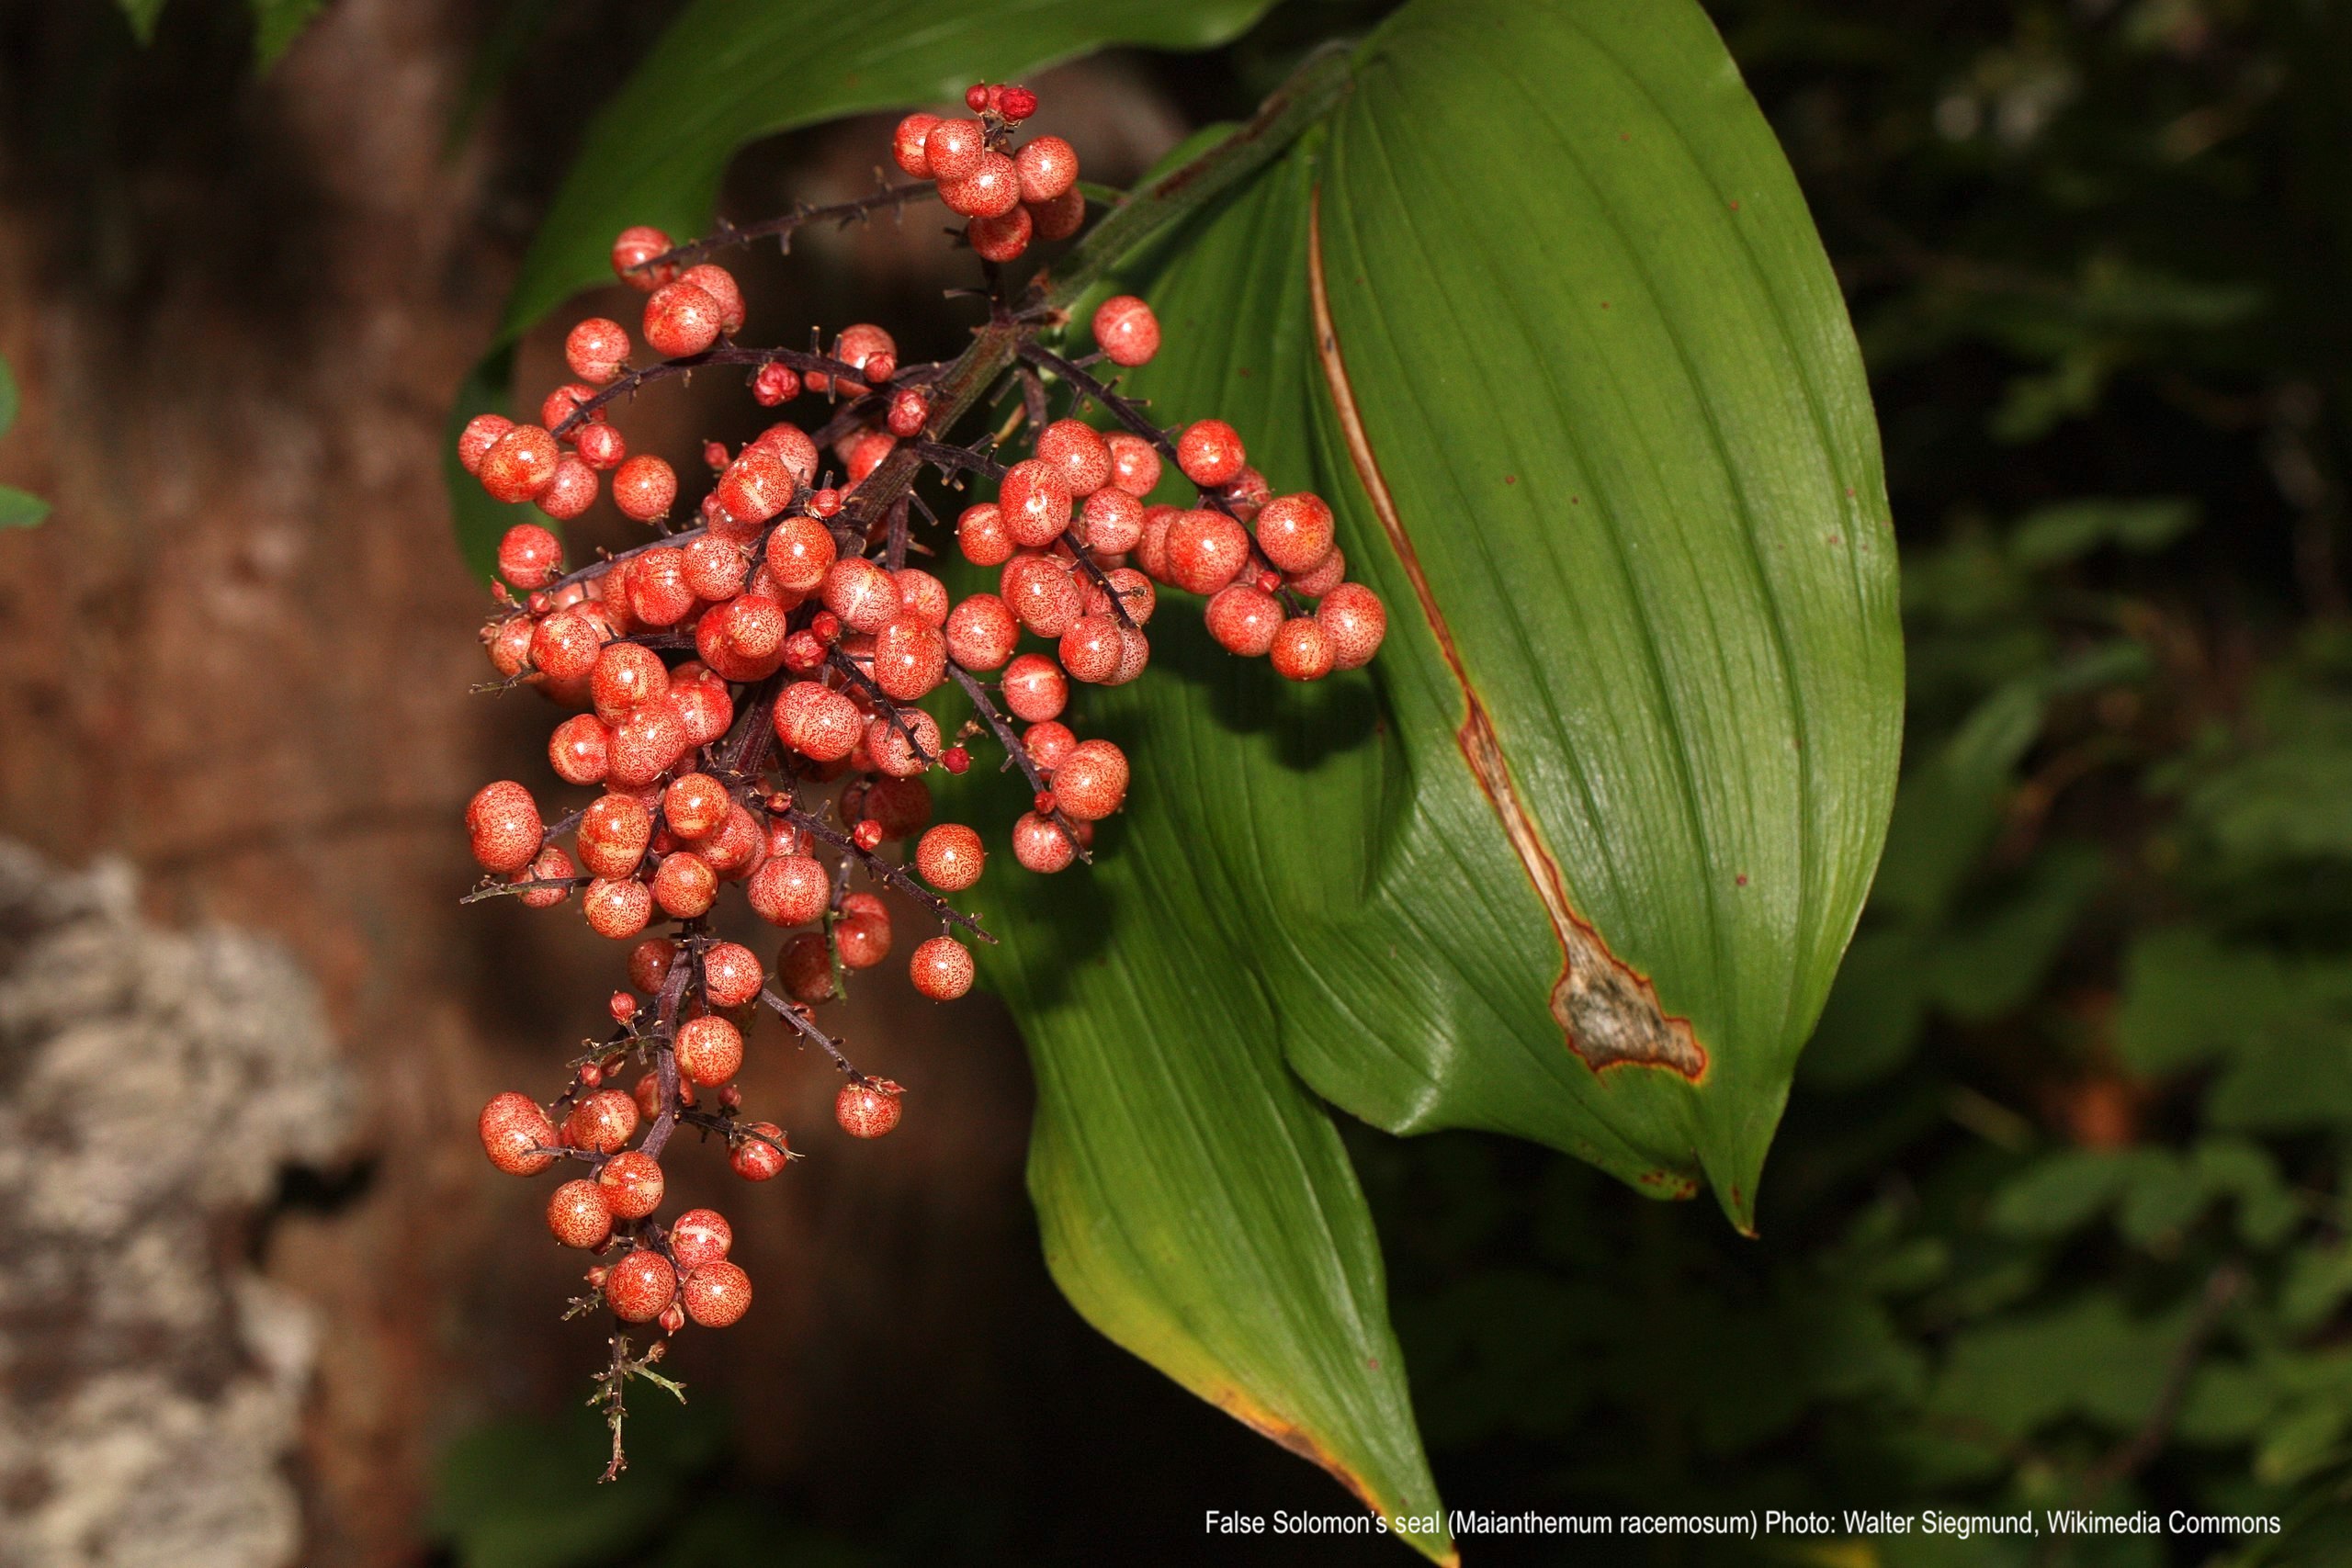 False Solomon's seal with red berries.